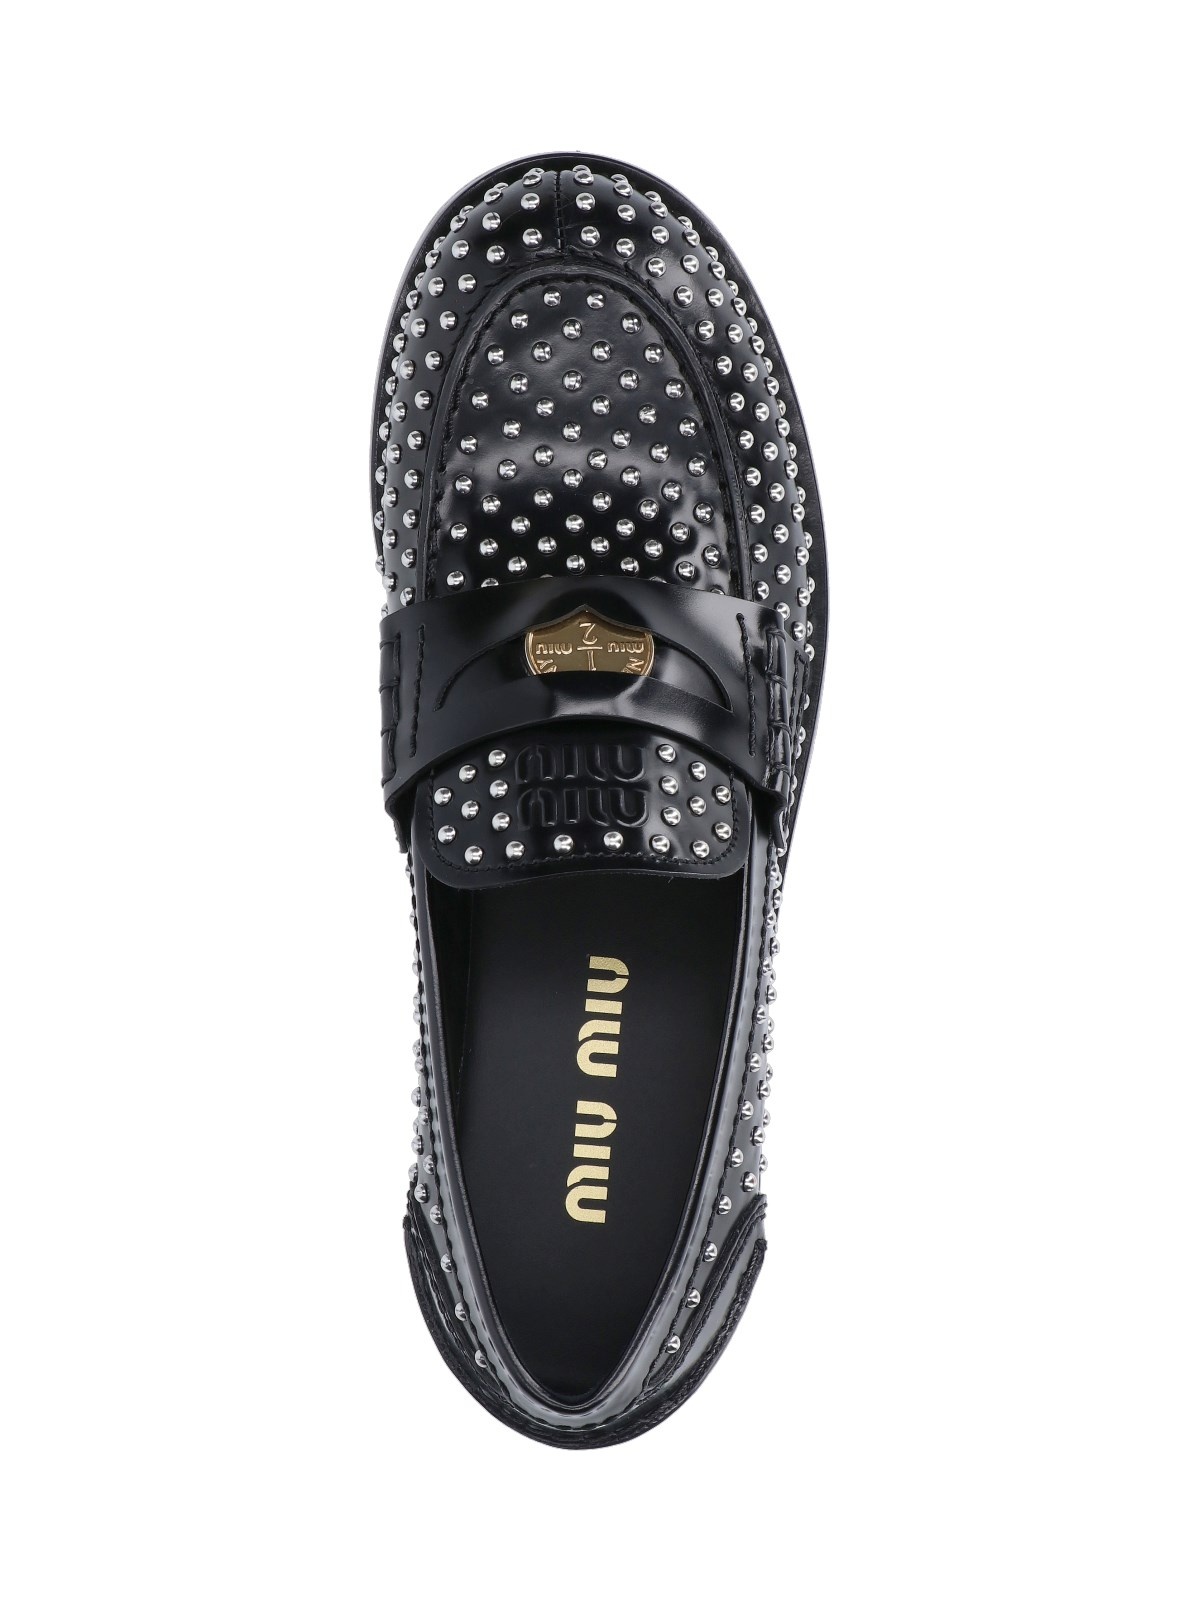 "PENNY LOAFERS" STUDDED LOAFERS - 5